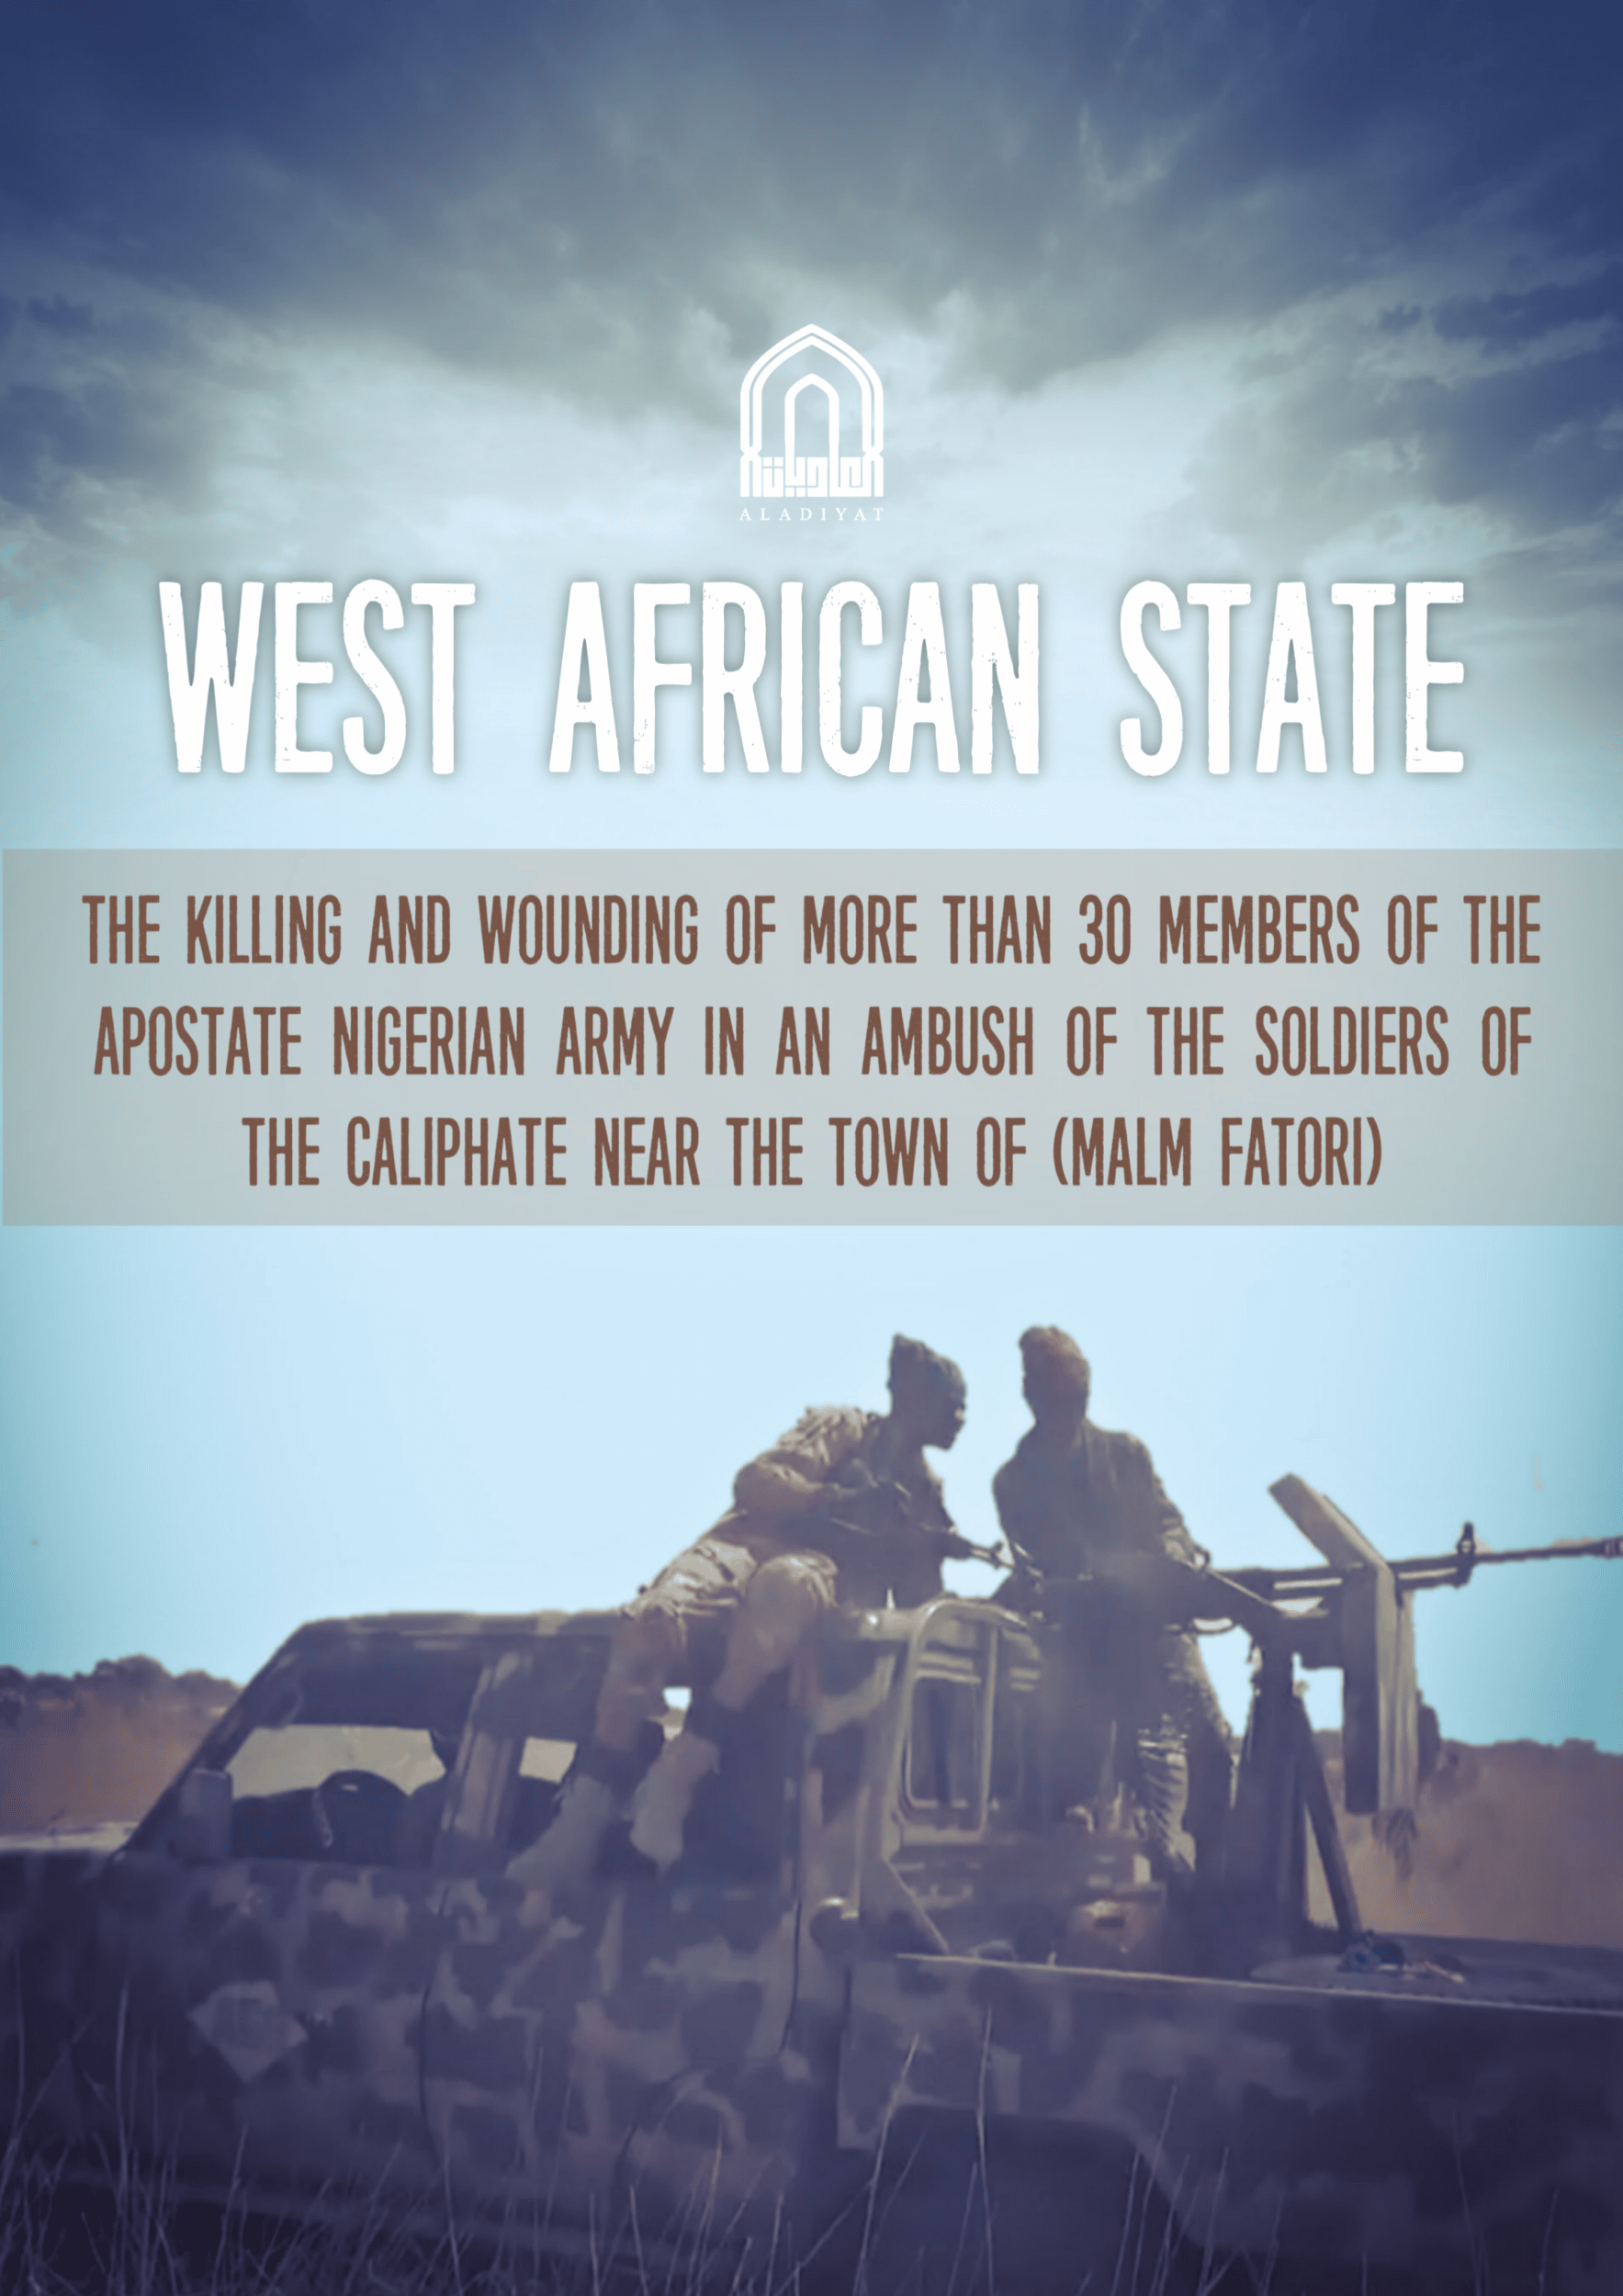 Poster) al-Adiyat Media (Unofficial Islamic State): "West African State: The Killing and Wounding of More Than 30 Members of the Apostate Nigerian Army in an Ambush of the Soldiers of the Caliphate near the Town of Malm Fatori" - 28 February 2022